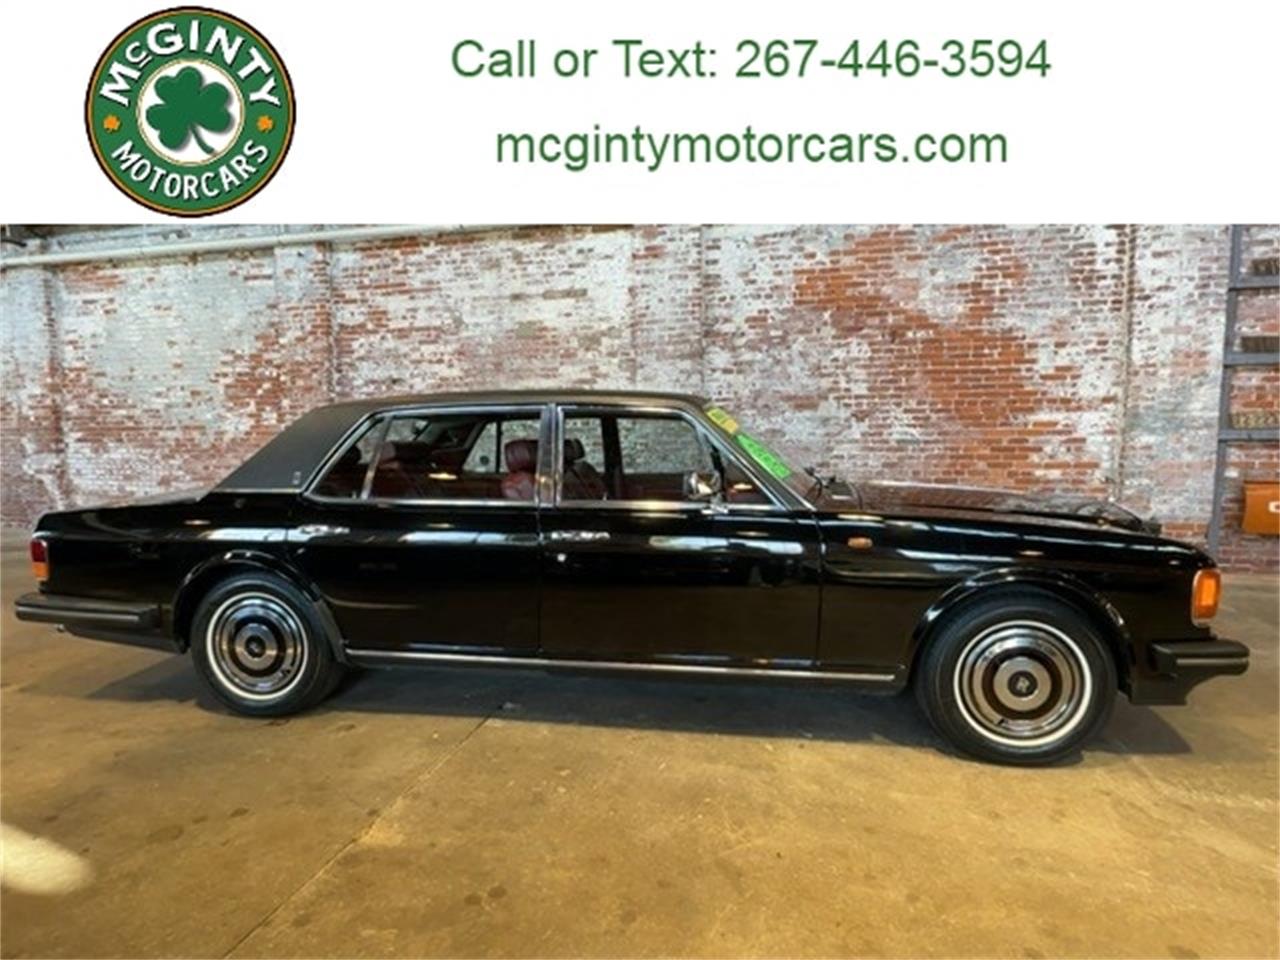 For Sale: 1989 Rolls-Royce Silver Spur in Reading, Pennsylvania for sale in Reading, PA